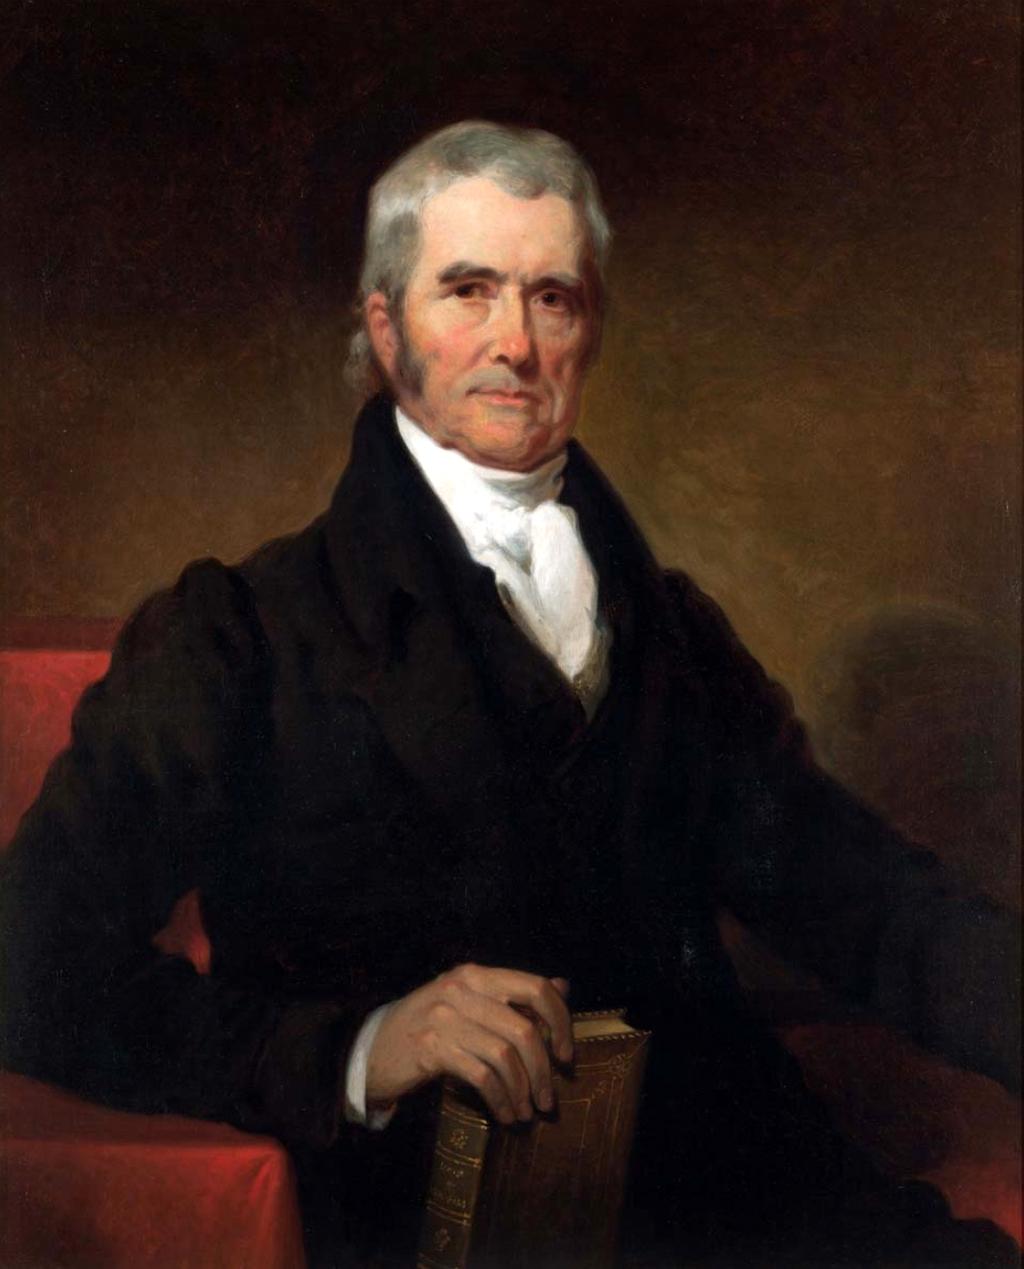 Marshall s Federalist Law While the Federalist poli%cal party was dying, Federalist policies lived on thanks to Chief Jus%ce John Marshall s term on the Supreme Court As one of the midnight judges